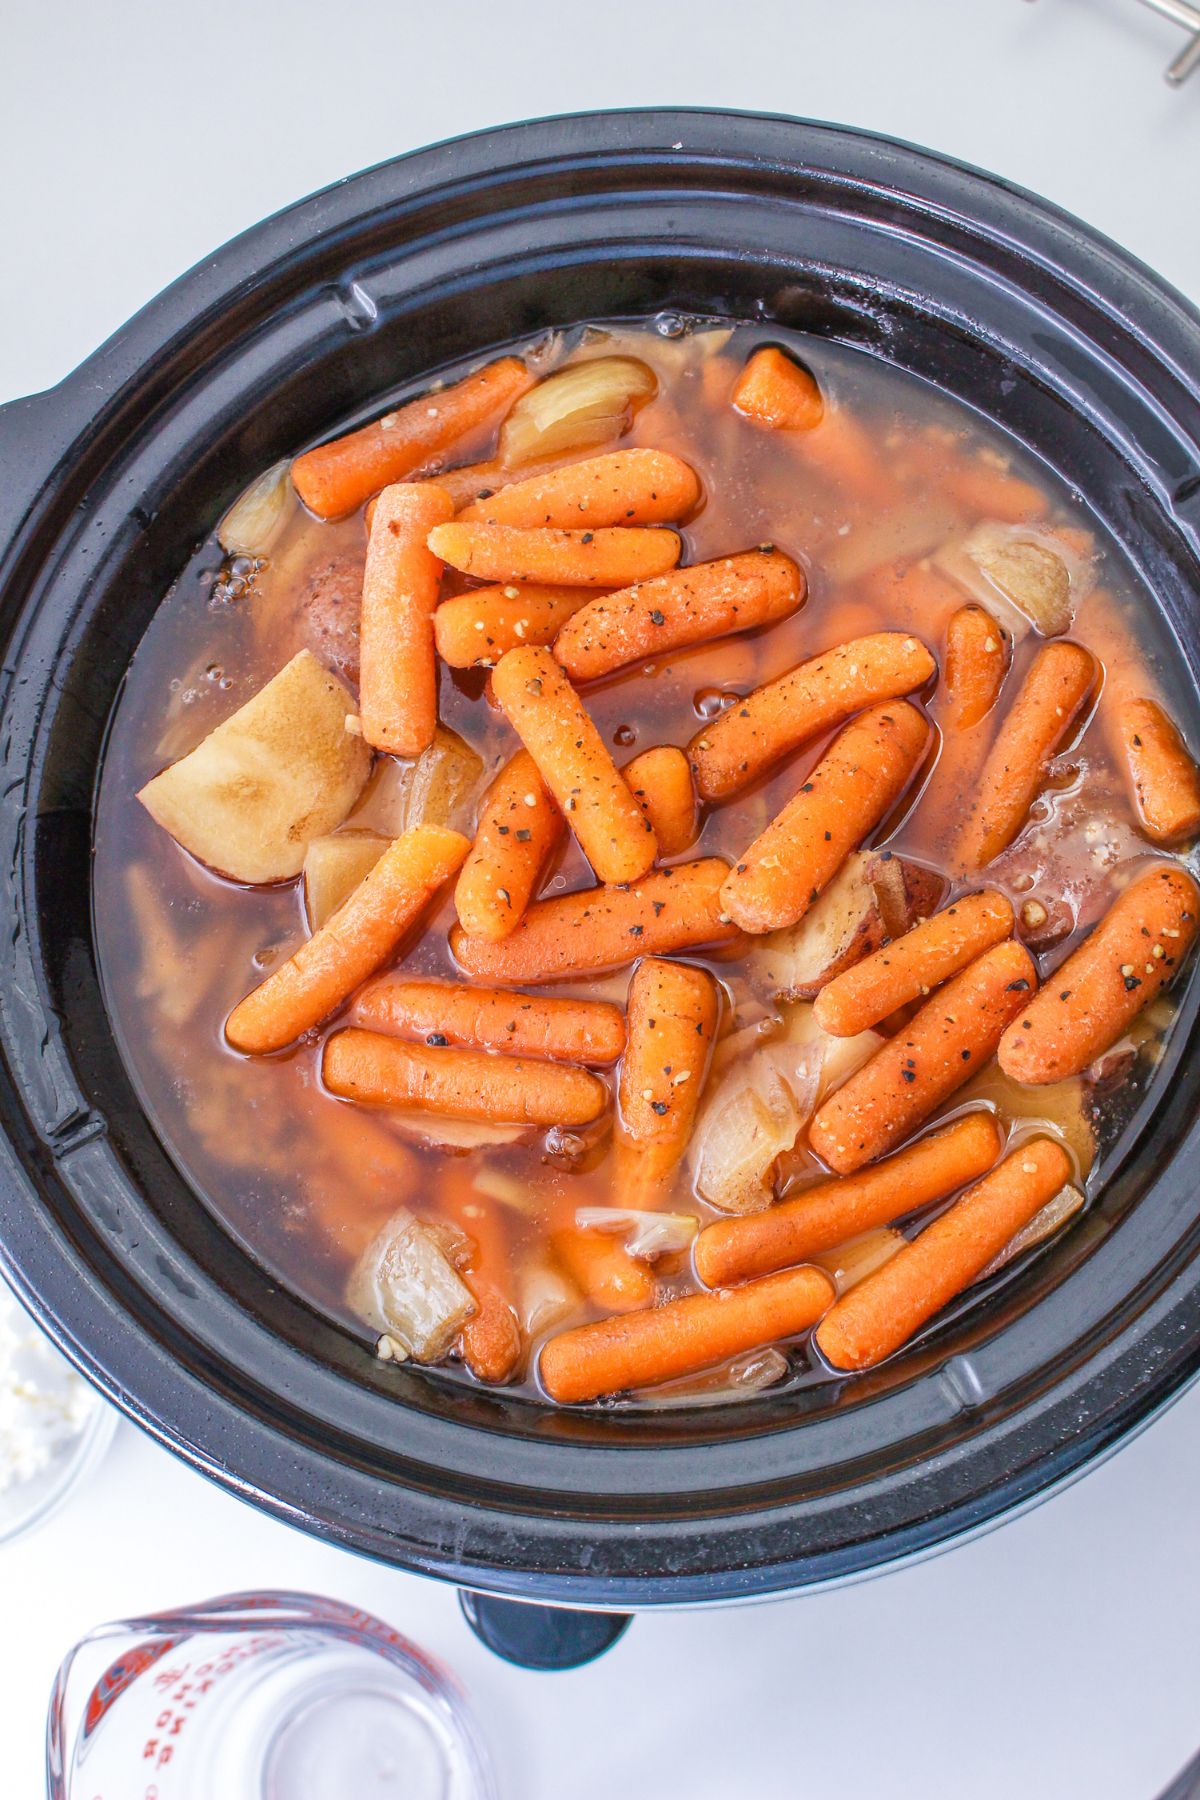 cooked pot roast, carrots, and potatoes in a slow cooker.